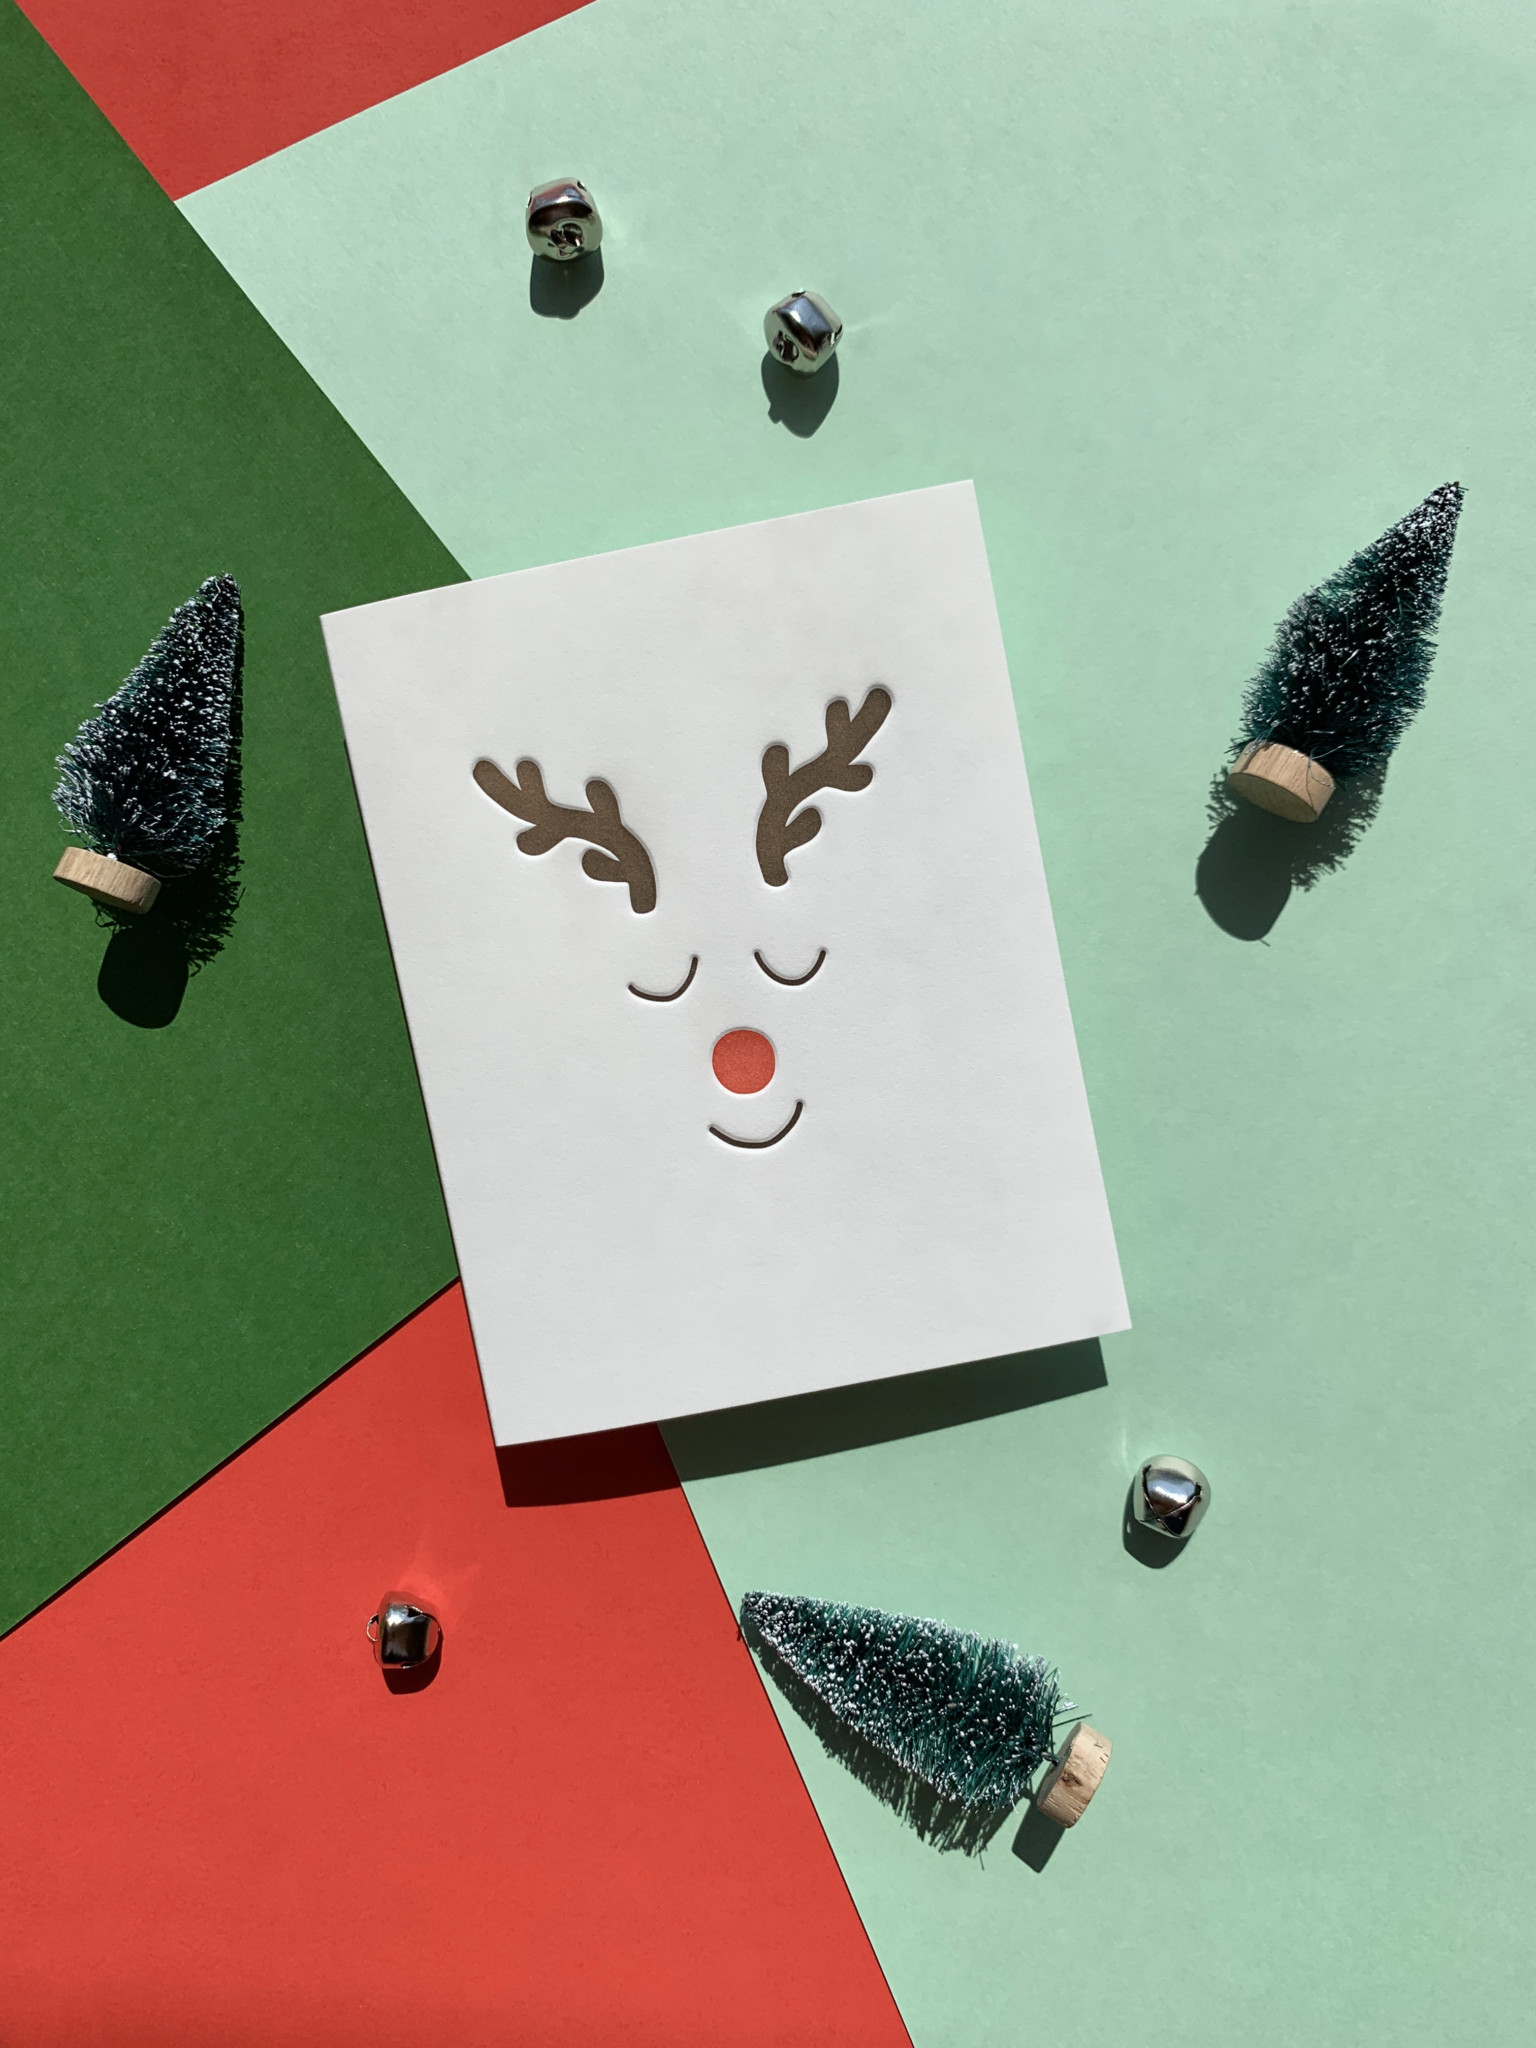 Antlers, a red nose, and eyelid lines show a minimalist Rudolph on this white cotton card.